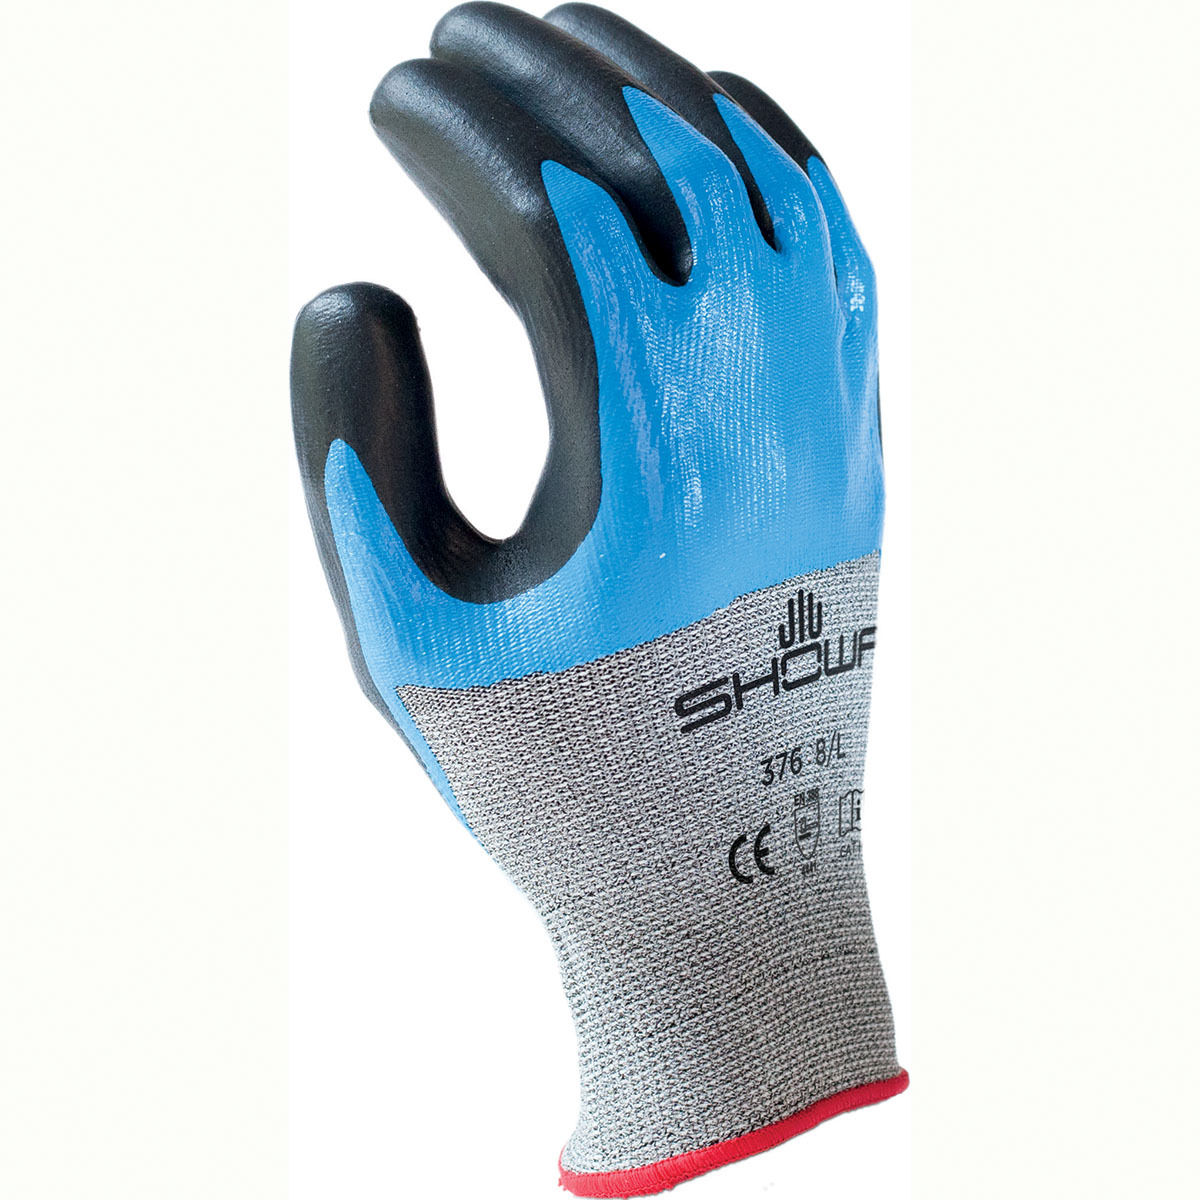 SHOWA® S-TEX® 376 13 Gauge Hagane Coil® And Polyester And Stainless Steel Cut Resistant Gloves With Nitrile Coating